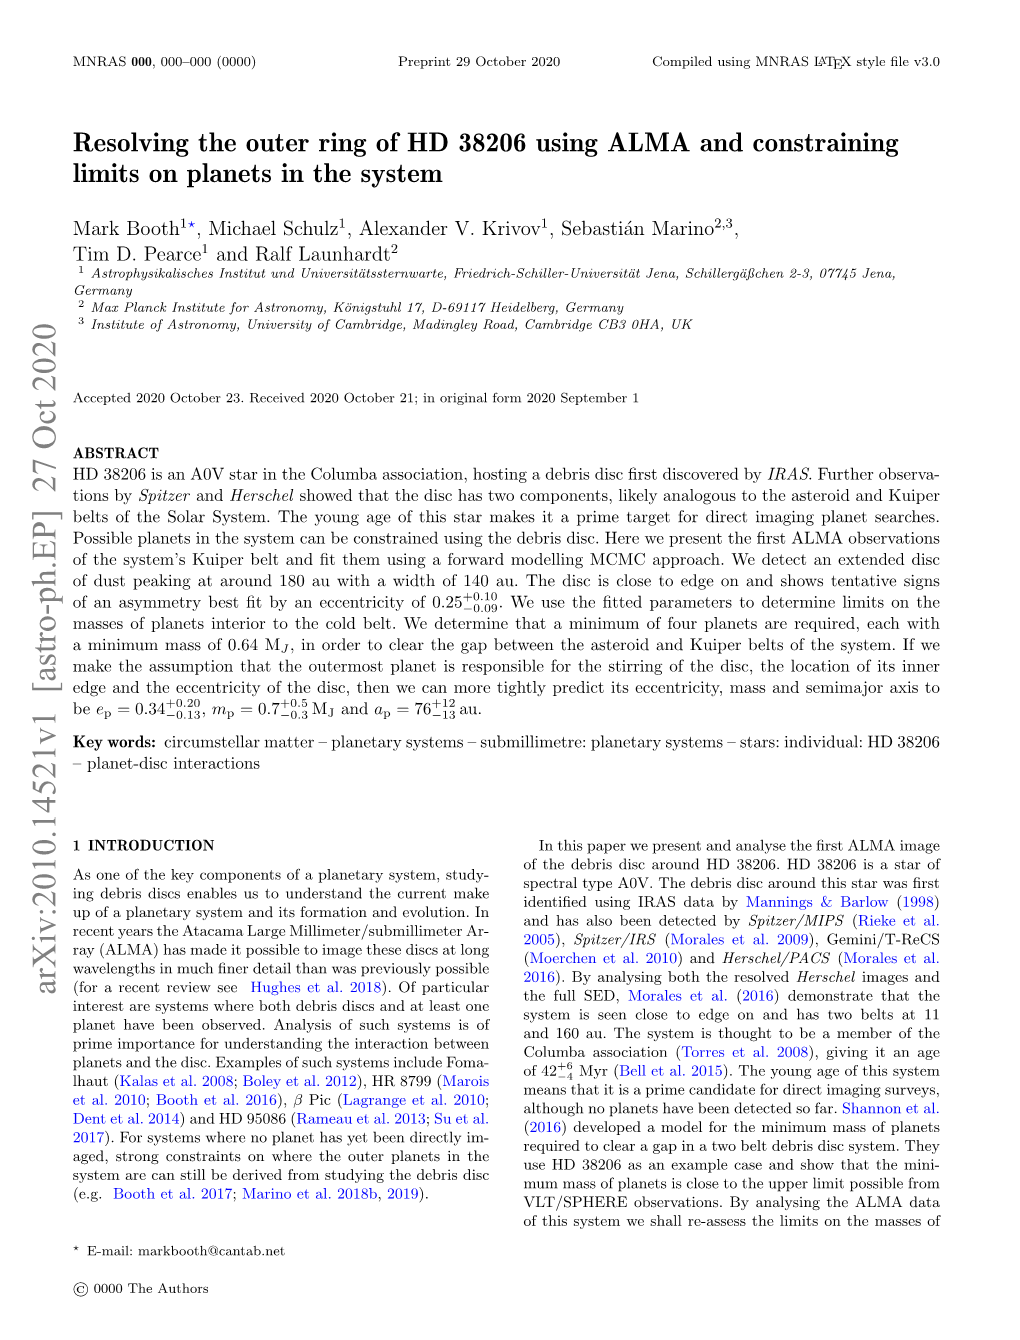 Resolving the Outer Ring of HD 38206 Using ALMA and Constraining Limits on Planets in the System